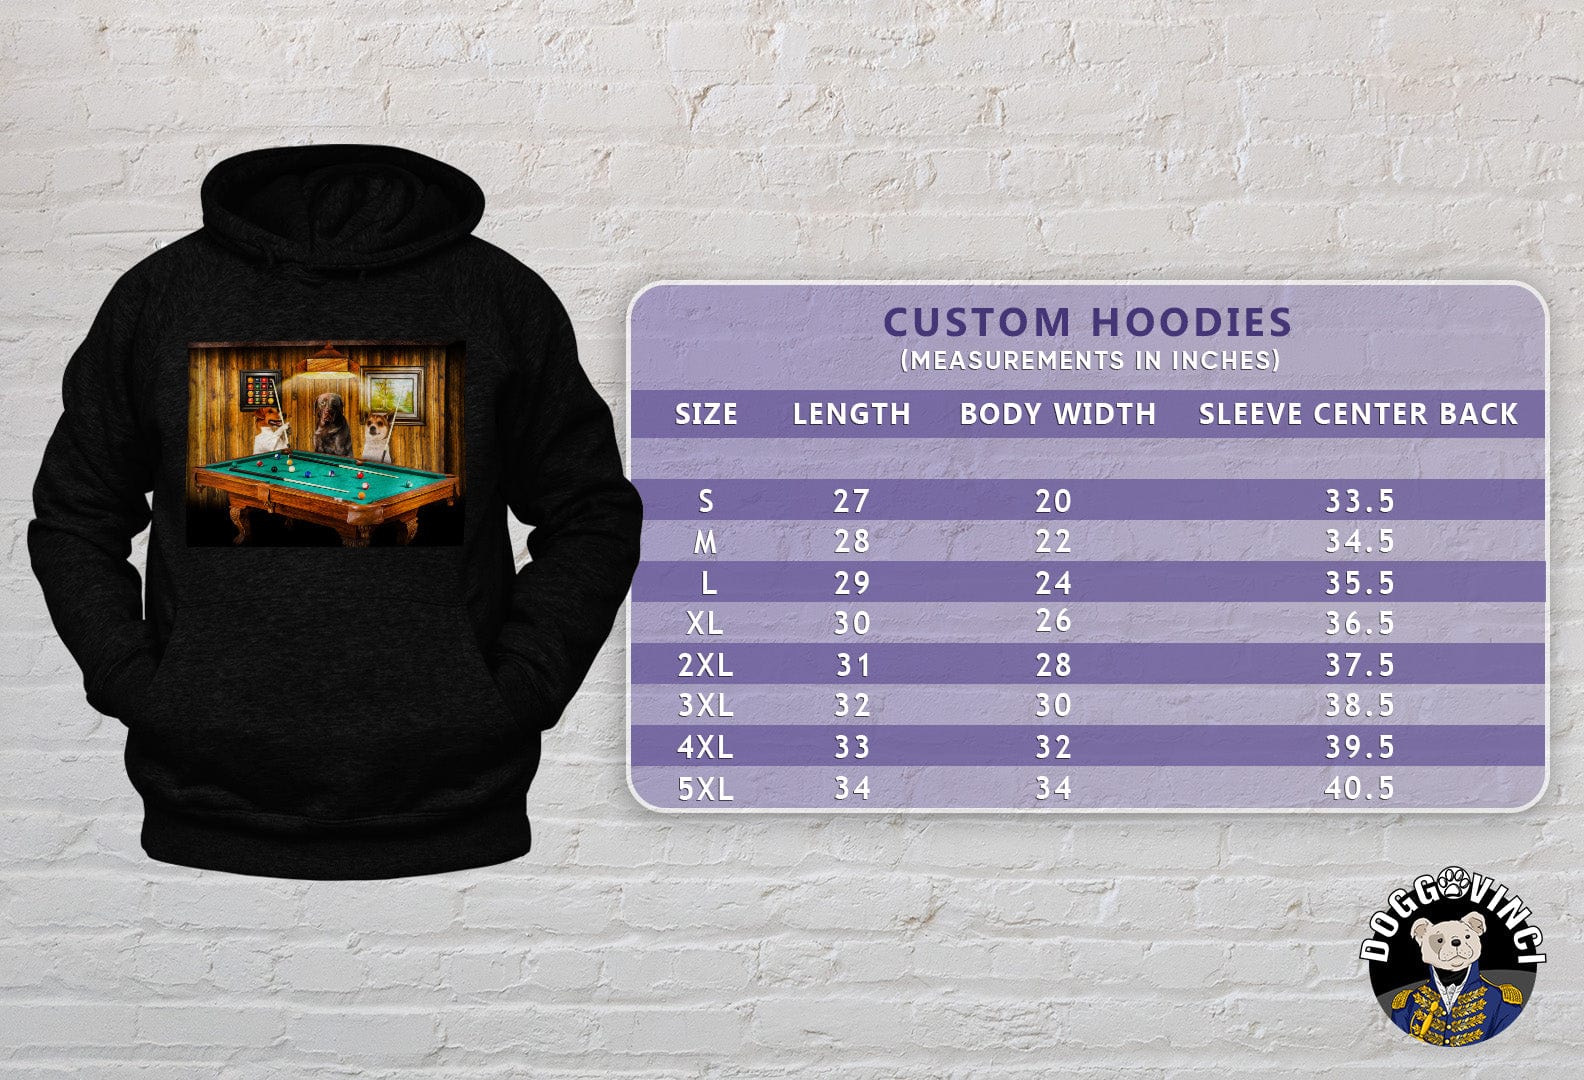 &#39;The Pool Players&#39; Personalized 3 Pet Hoody